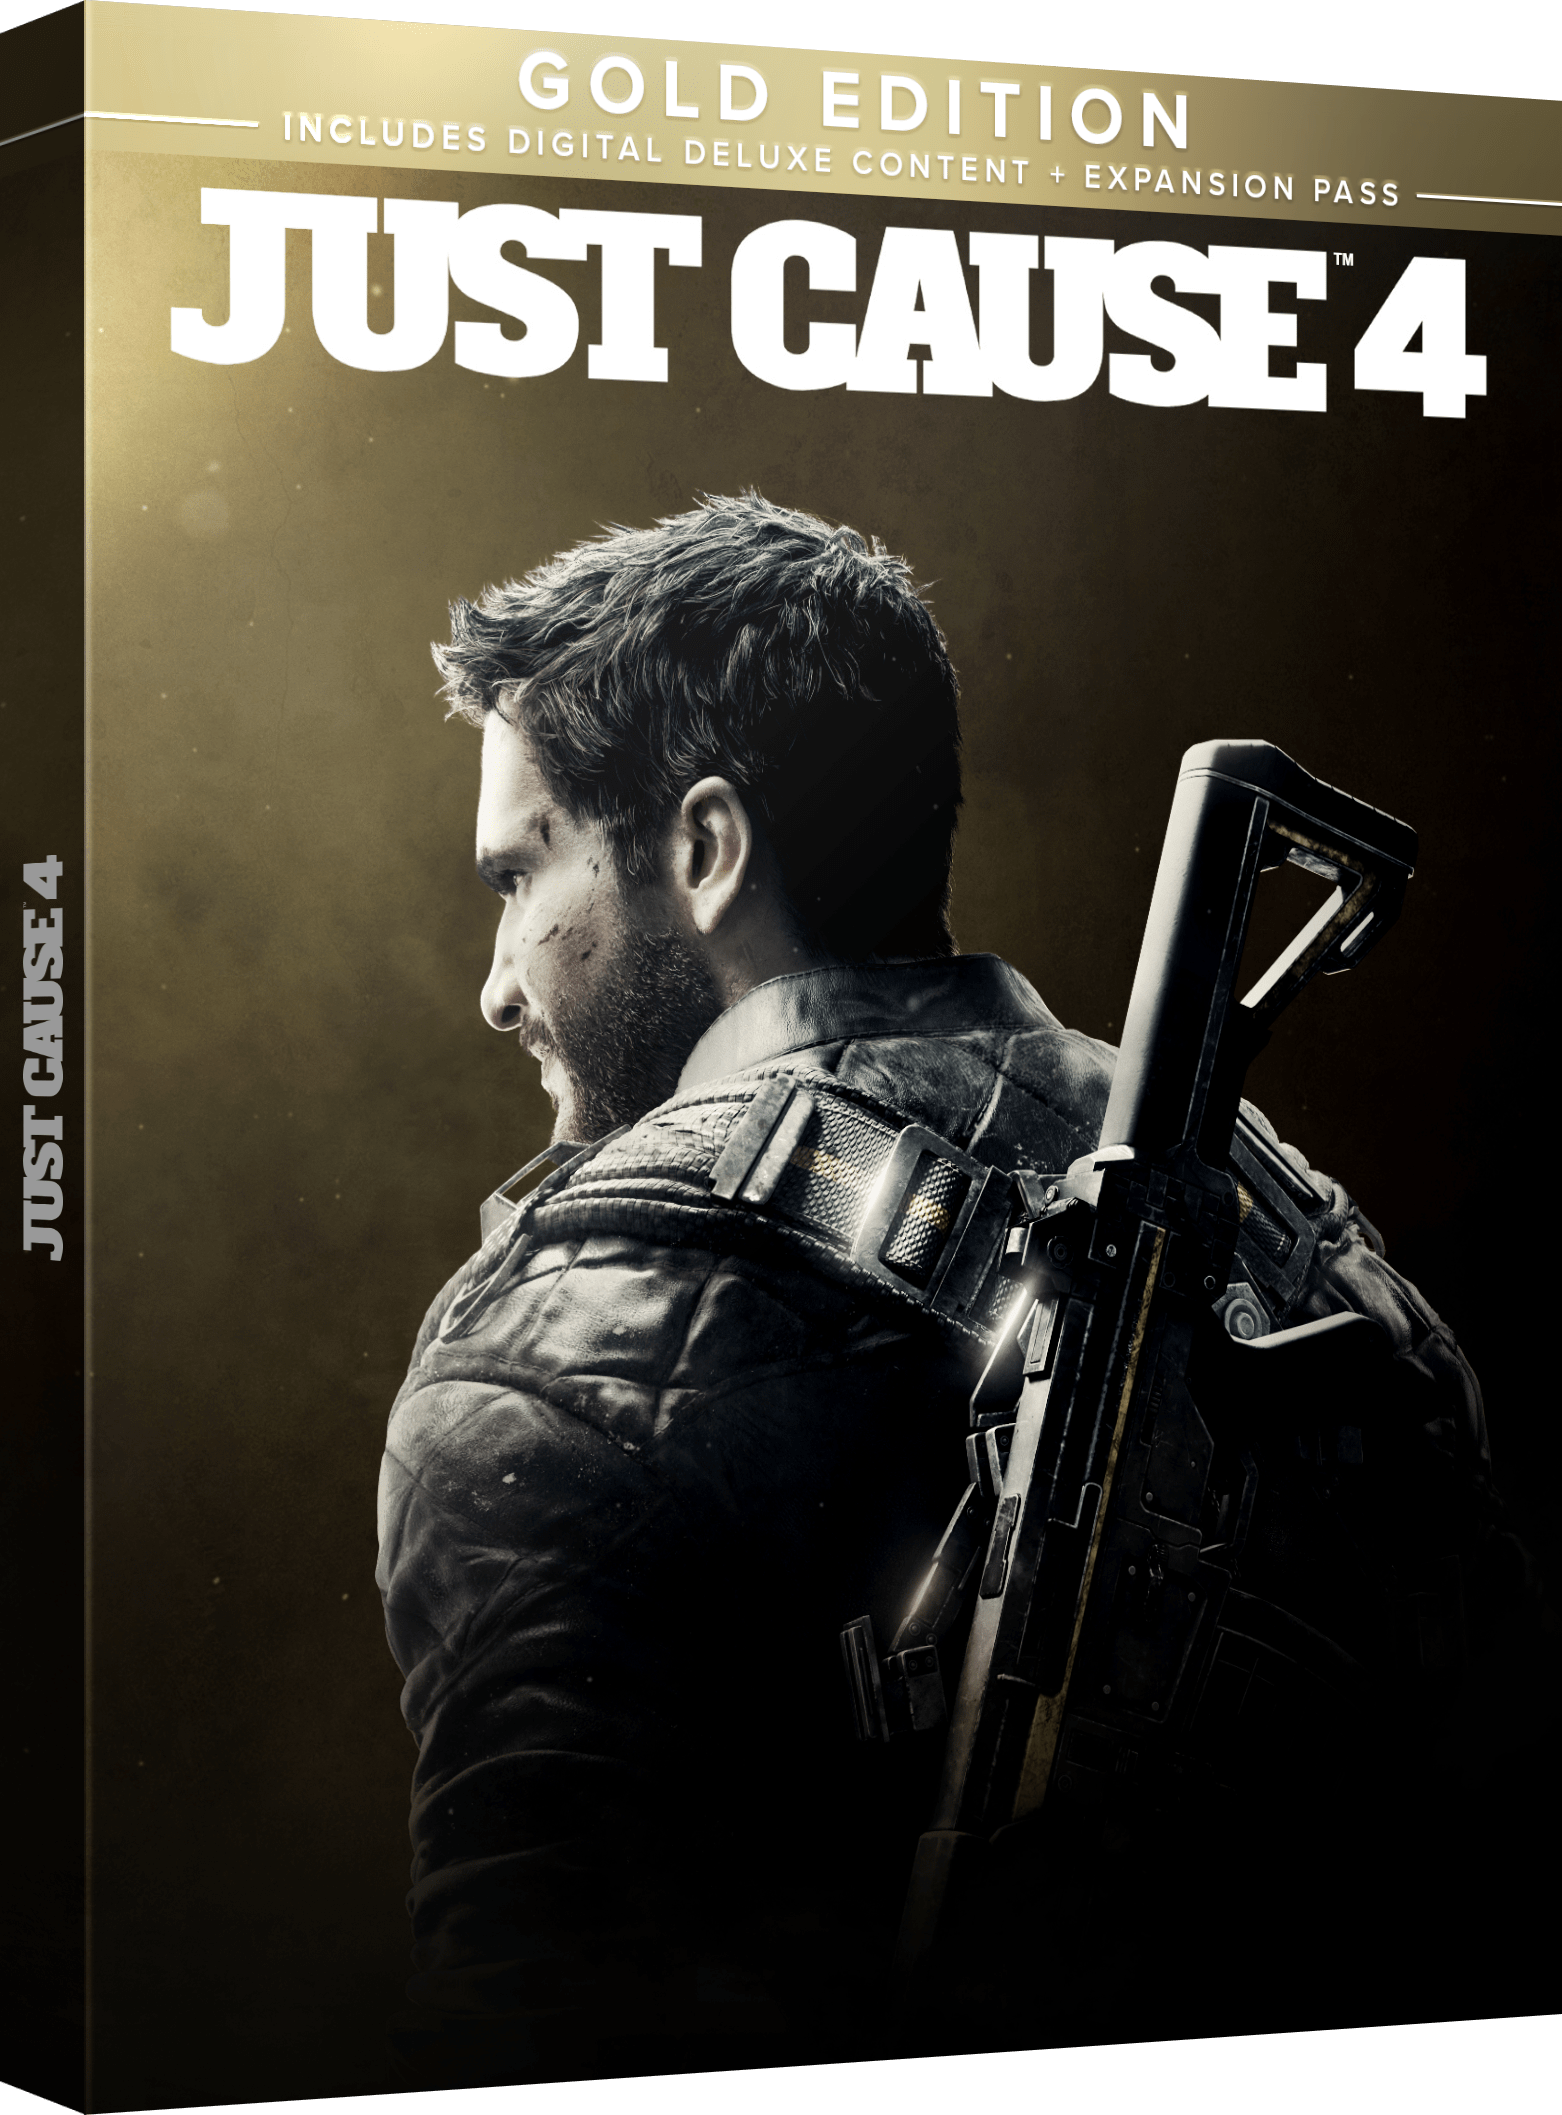 JC4 Gold Edition Outer Sleeve